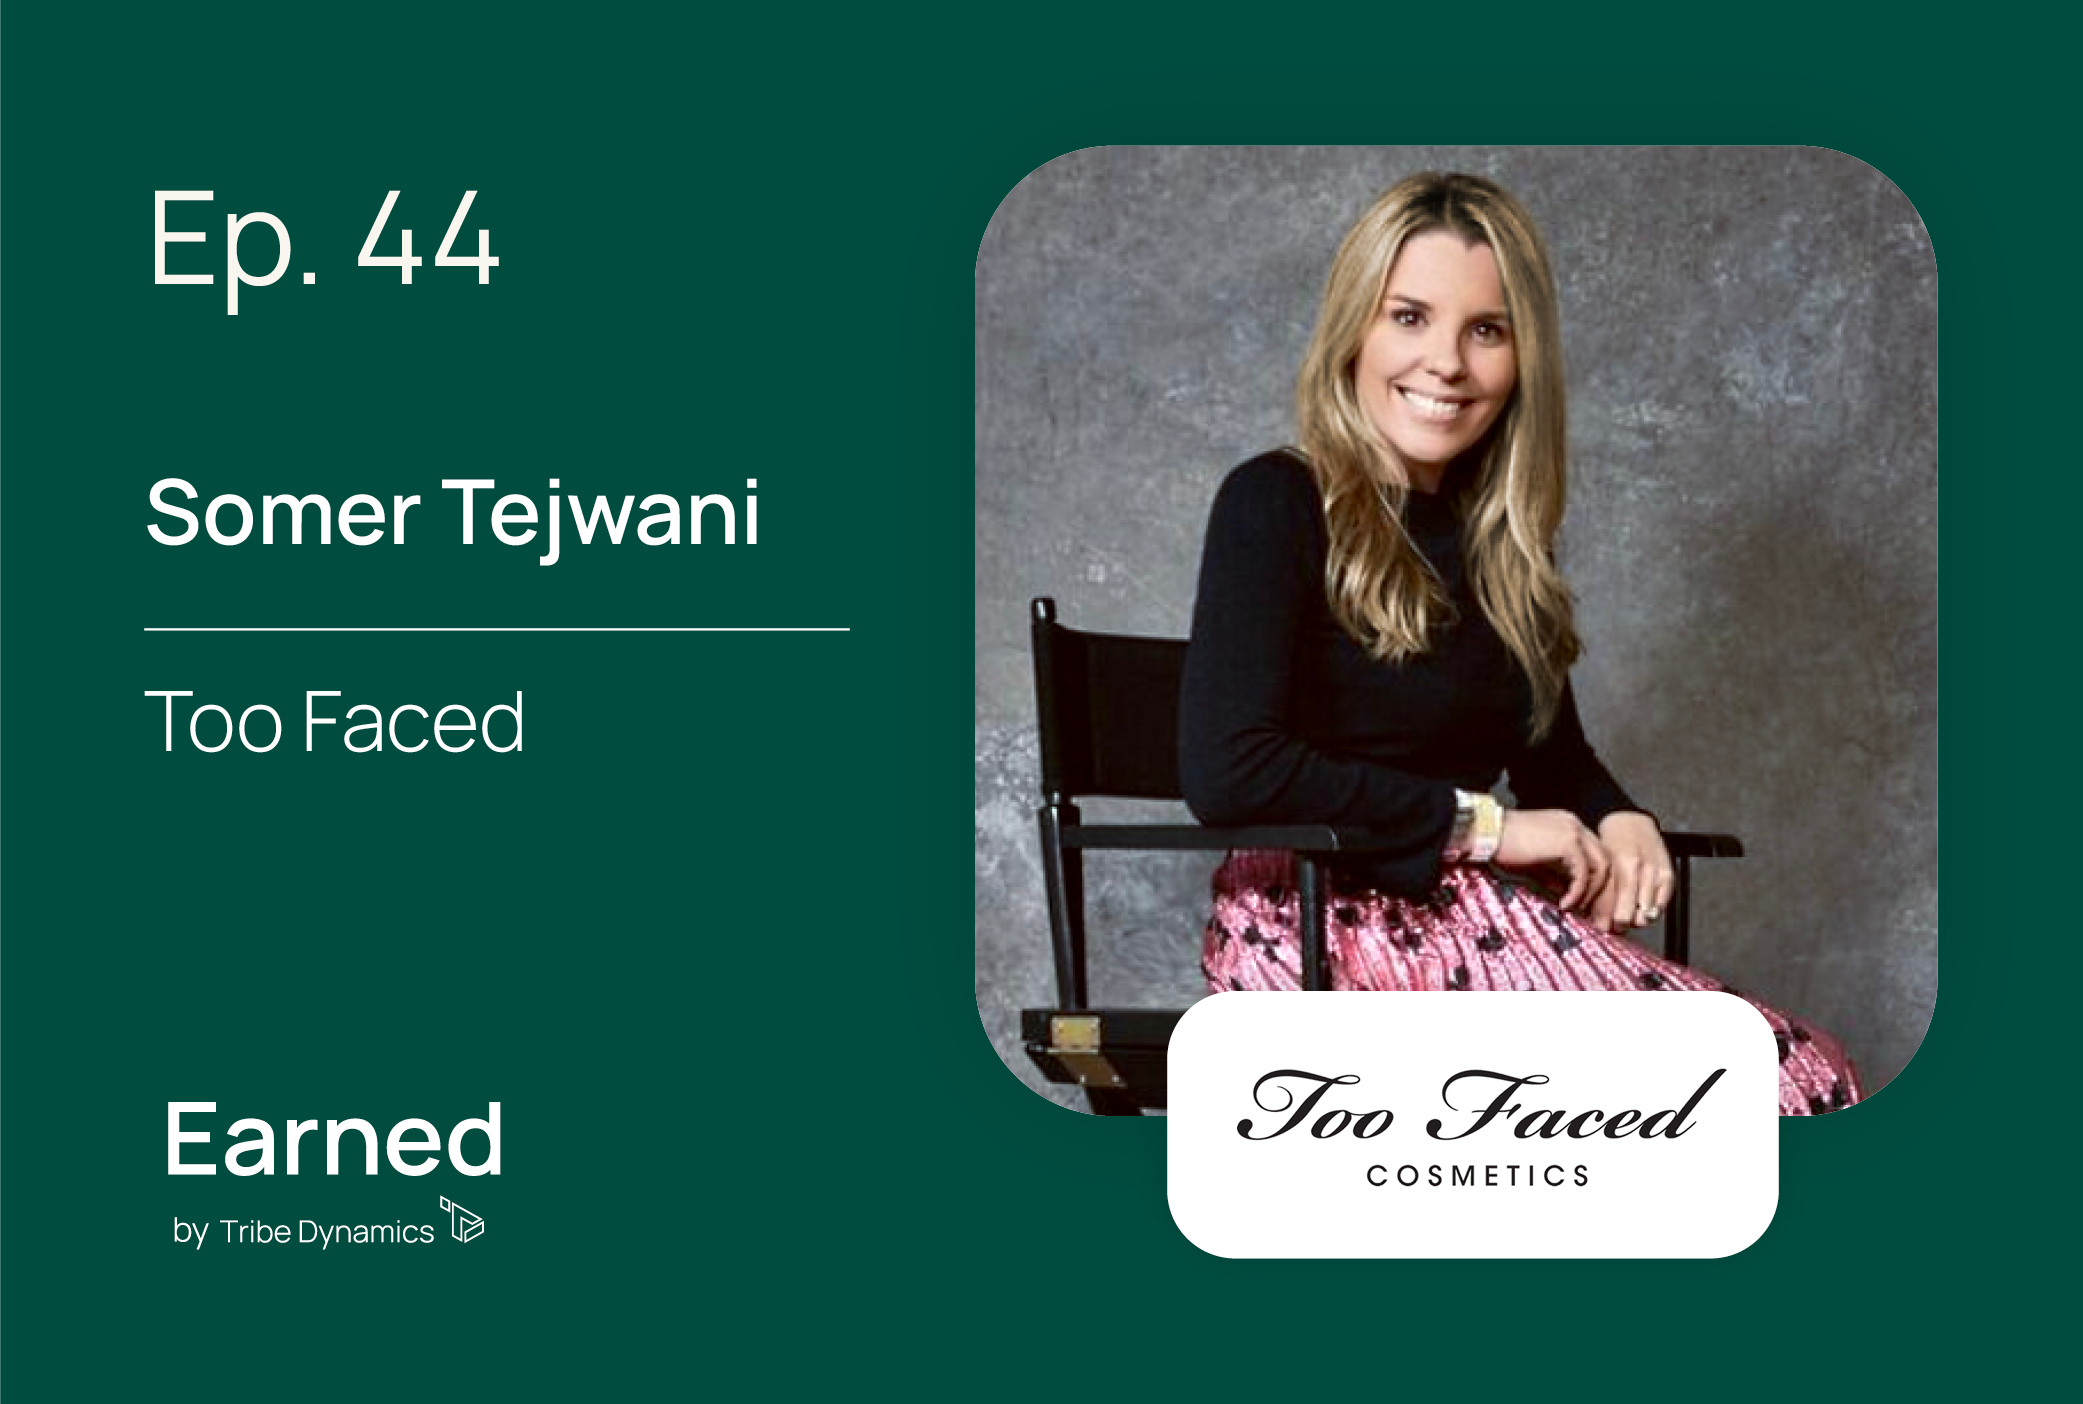 Earned Ep. 44: Somer Tejwani Talks Too Faced’s Winning Influencer Marketing Strategy